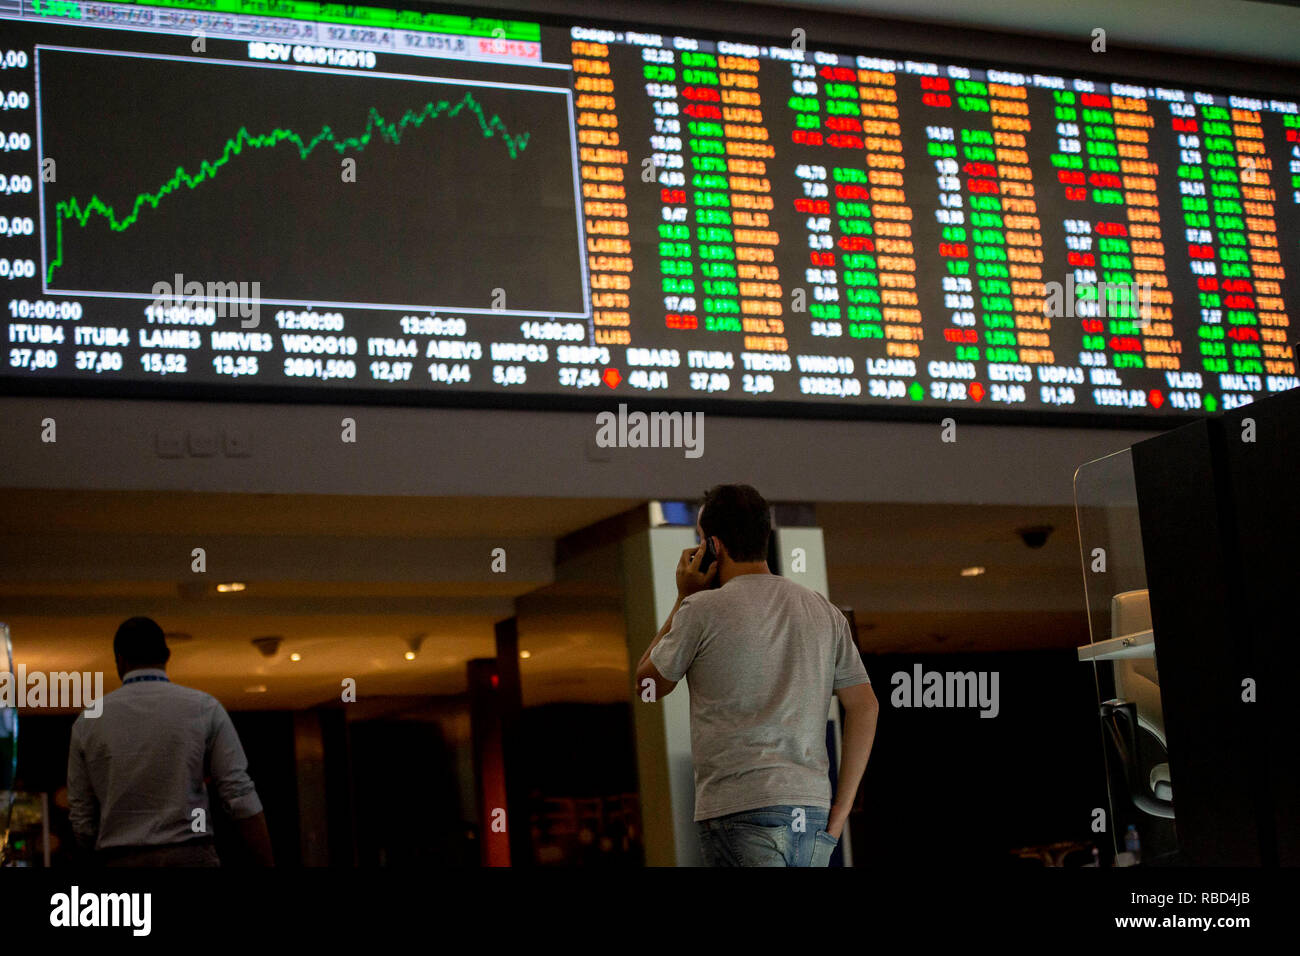 SP - Sao Paulo - 09/01/2019 - Bovespa sets new record - The IBOVESPA Index hit a new record in the early afternoon of Wednesday, January 9th, operating above 93,000 points. Photo: Suamy Beydoun / AGIF Stock Photo